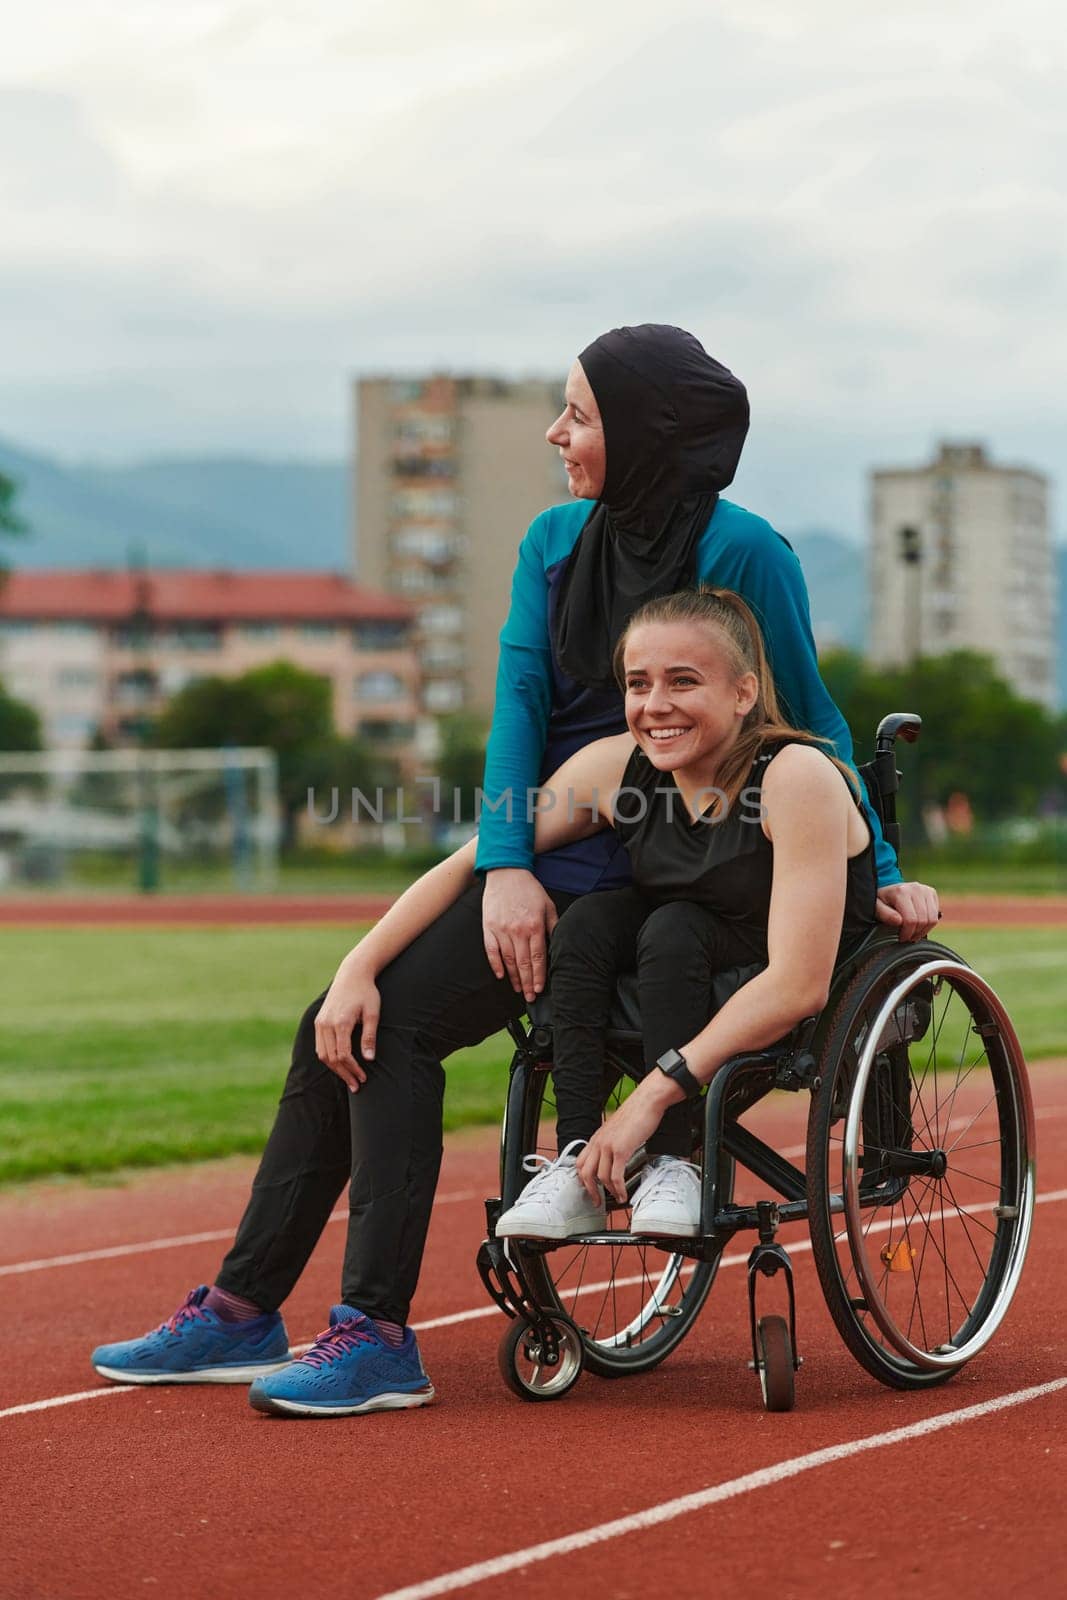 A Muslim woman wearing a burqa resting with a woman with disability after a hard training session on the marathon course by dotshock